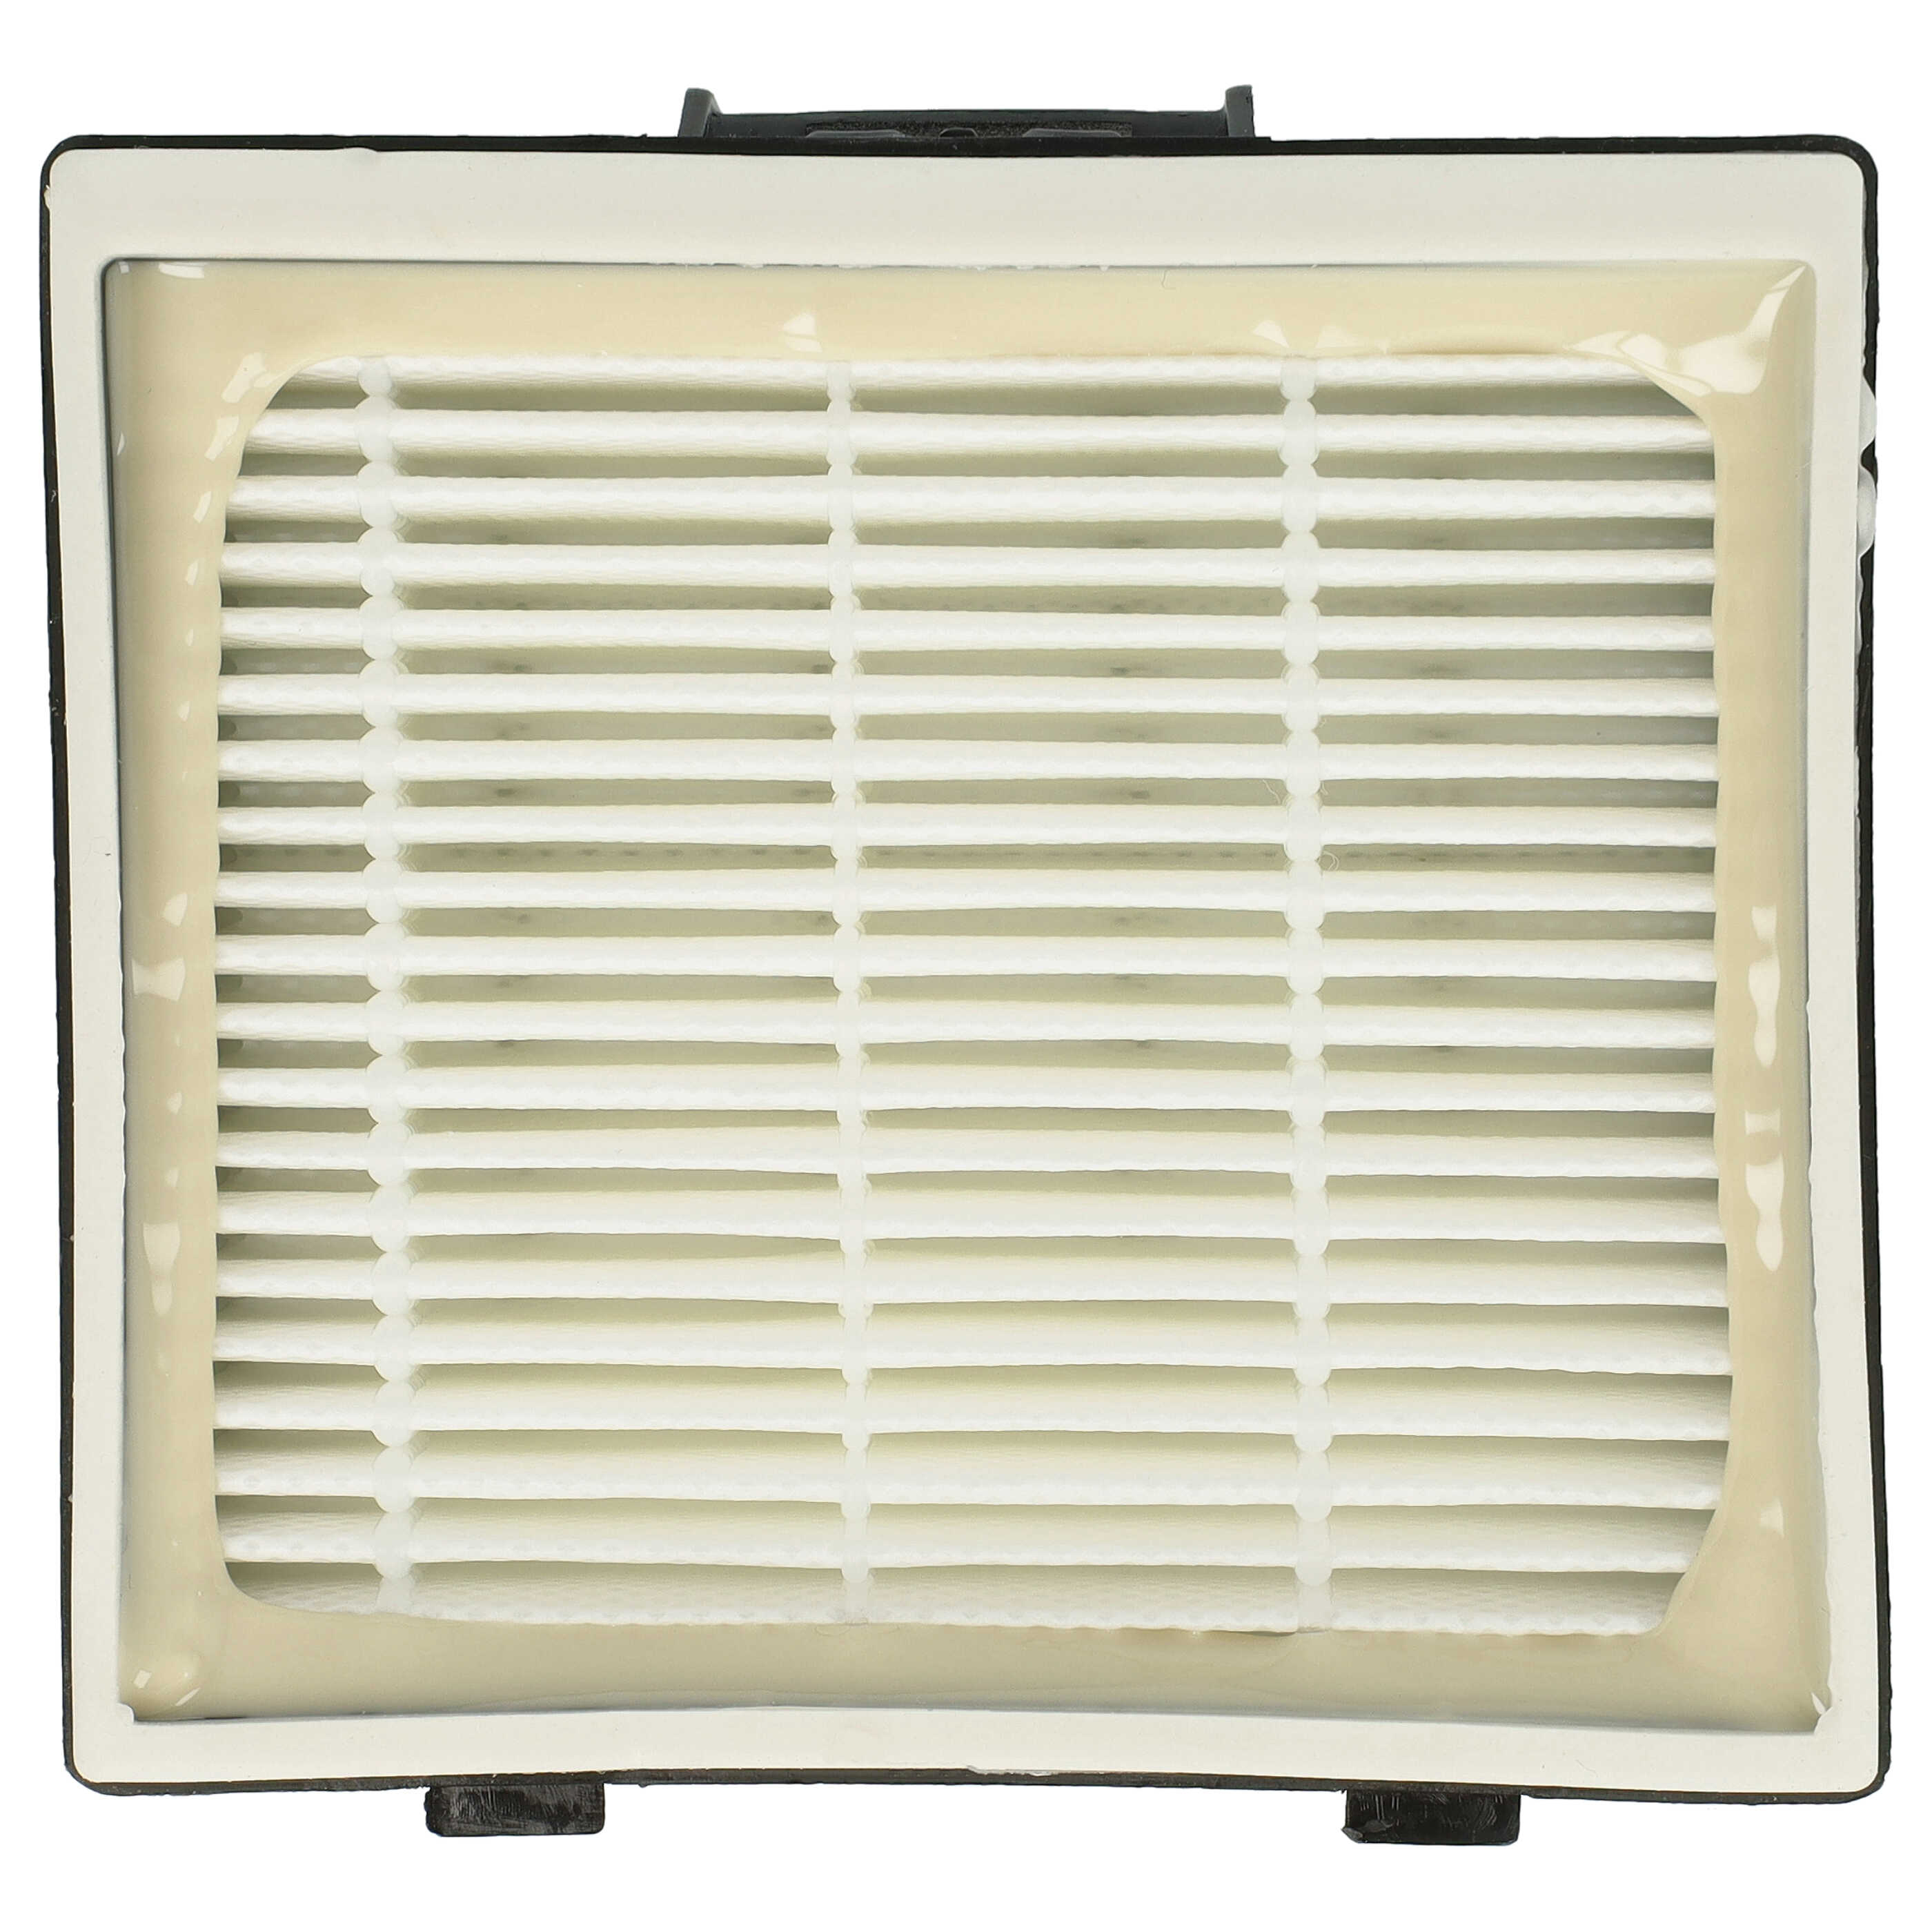 1x HEPA filter replaces Bosch/Siemens 578731, 572234, 426966 for PrivilegVacuum Cleaner, filter class H12